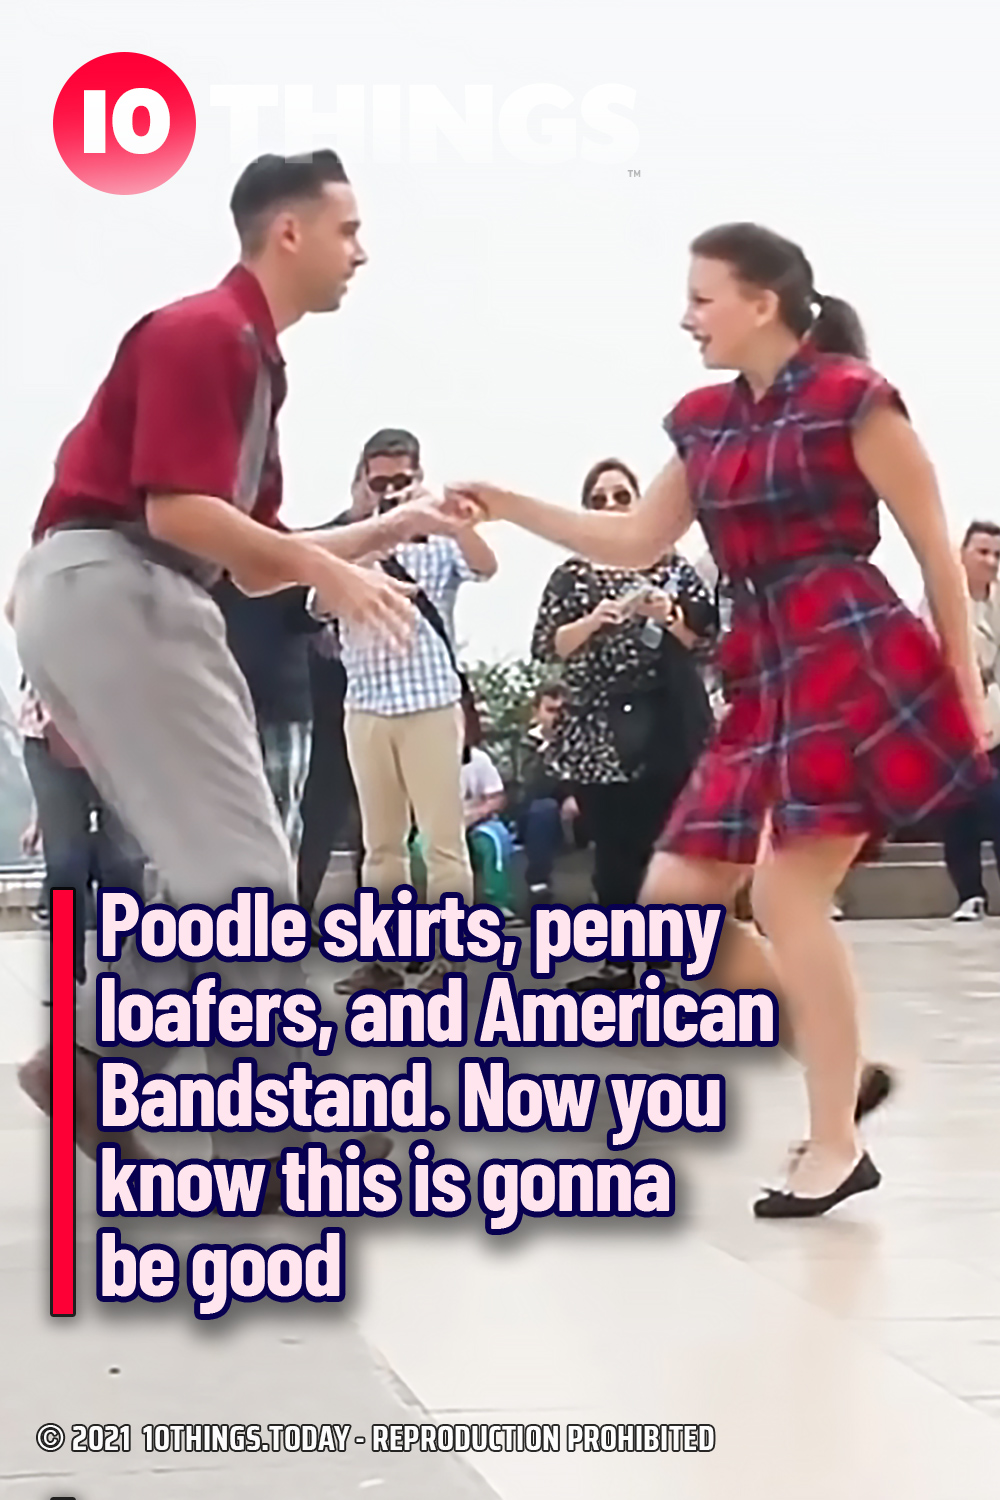 Poodle skirts, penny loafers, and American Bandstand. Now you know this is gonna be good